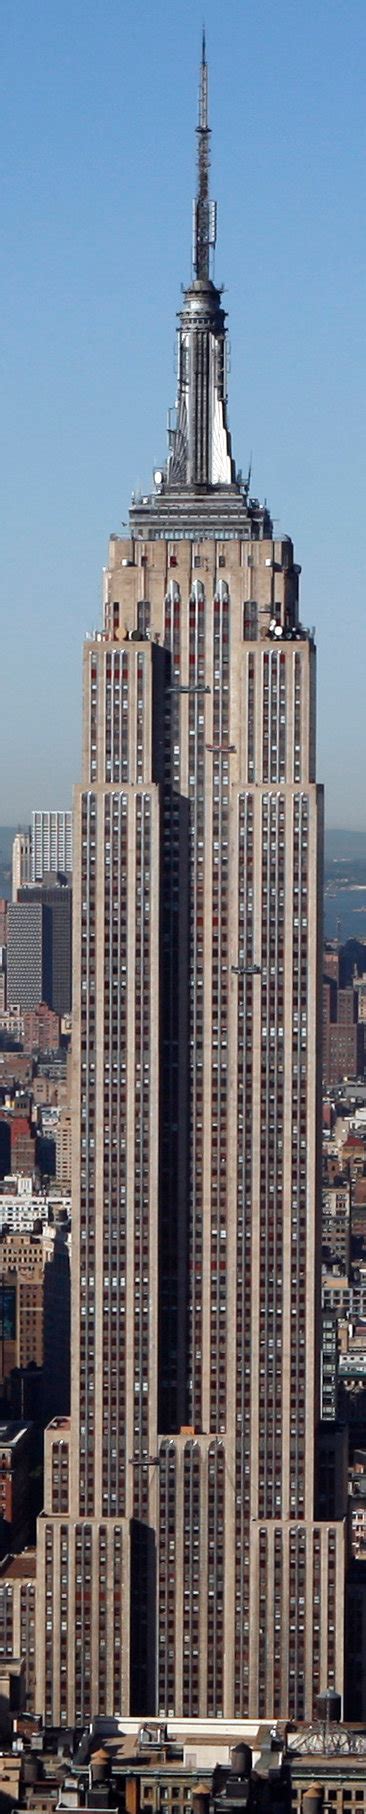 Empire State Building Has How Many Floors